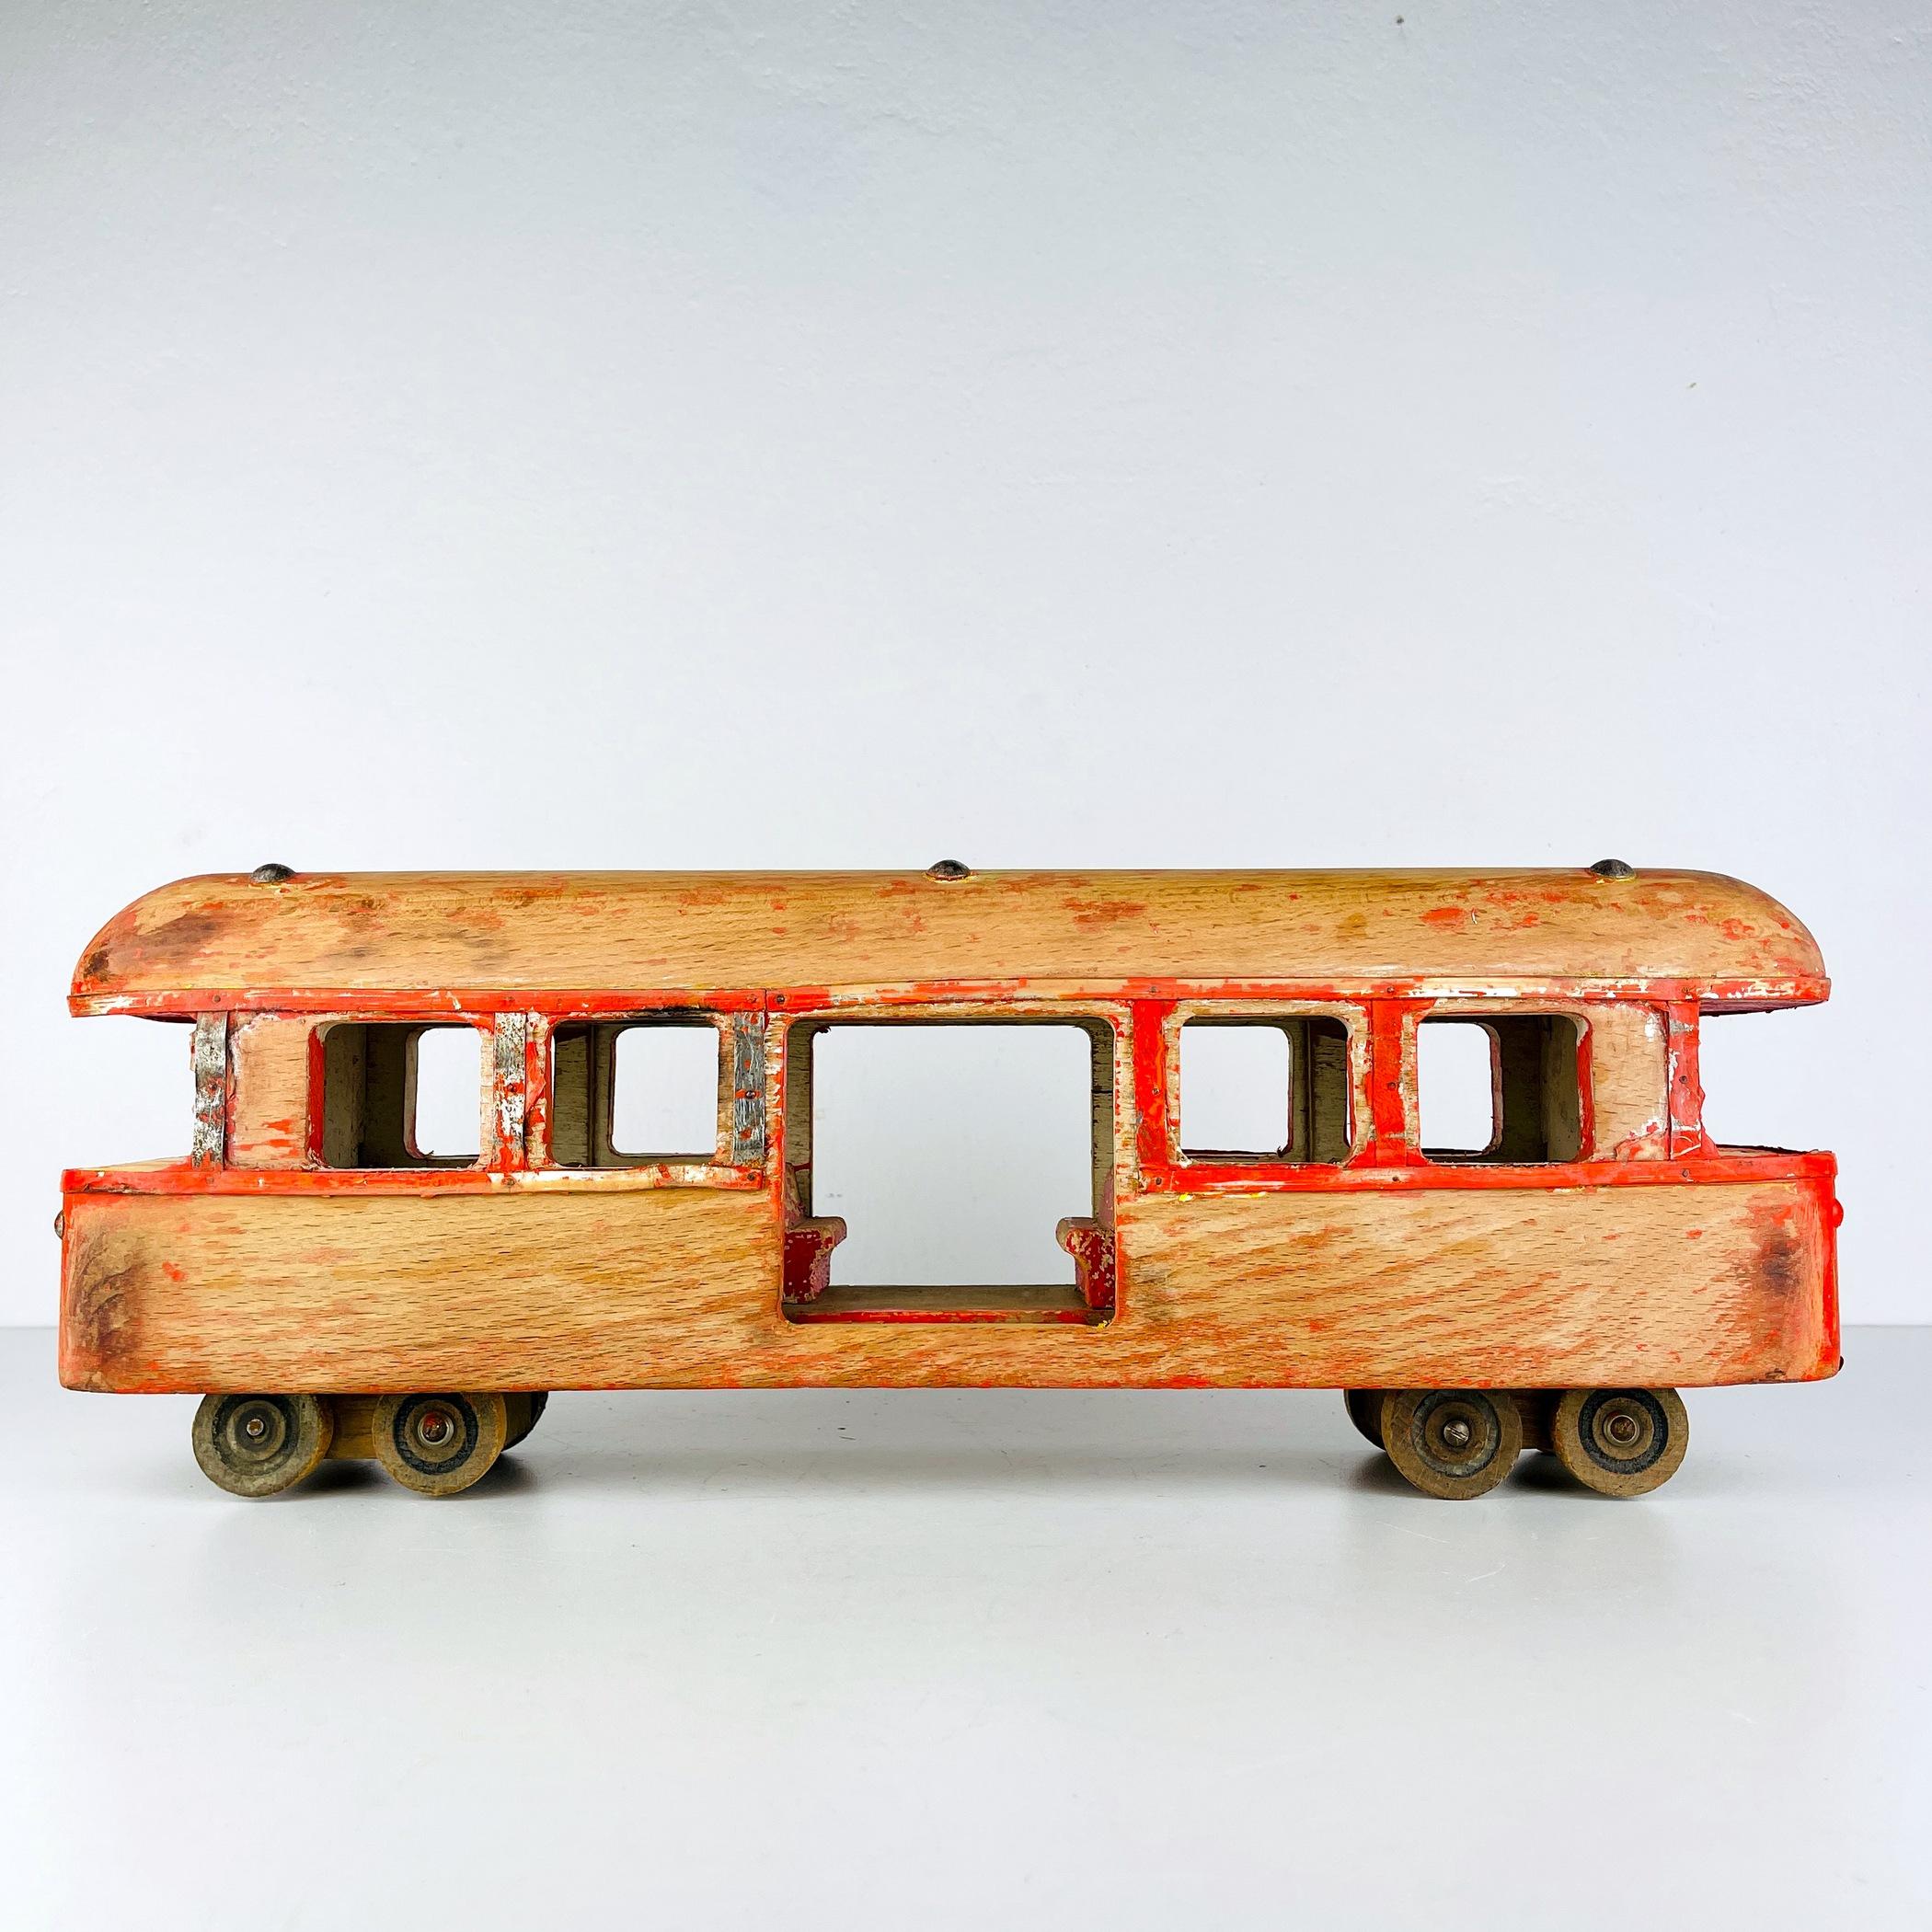 Vintage Wooden Toy Railway Carriage from Italy, 1950s - Large Decorative Piece with Partially Preserved Original Paint Step into the past with this incredible piece of history - a vintage wooden toy railway carriage from Italy, dating back to the